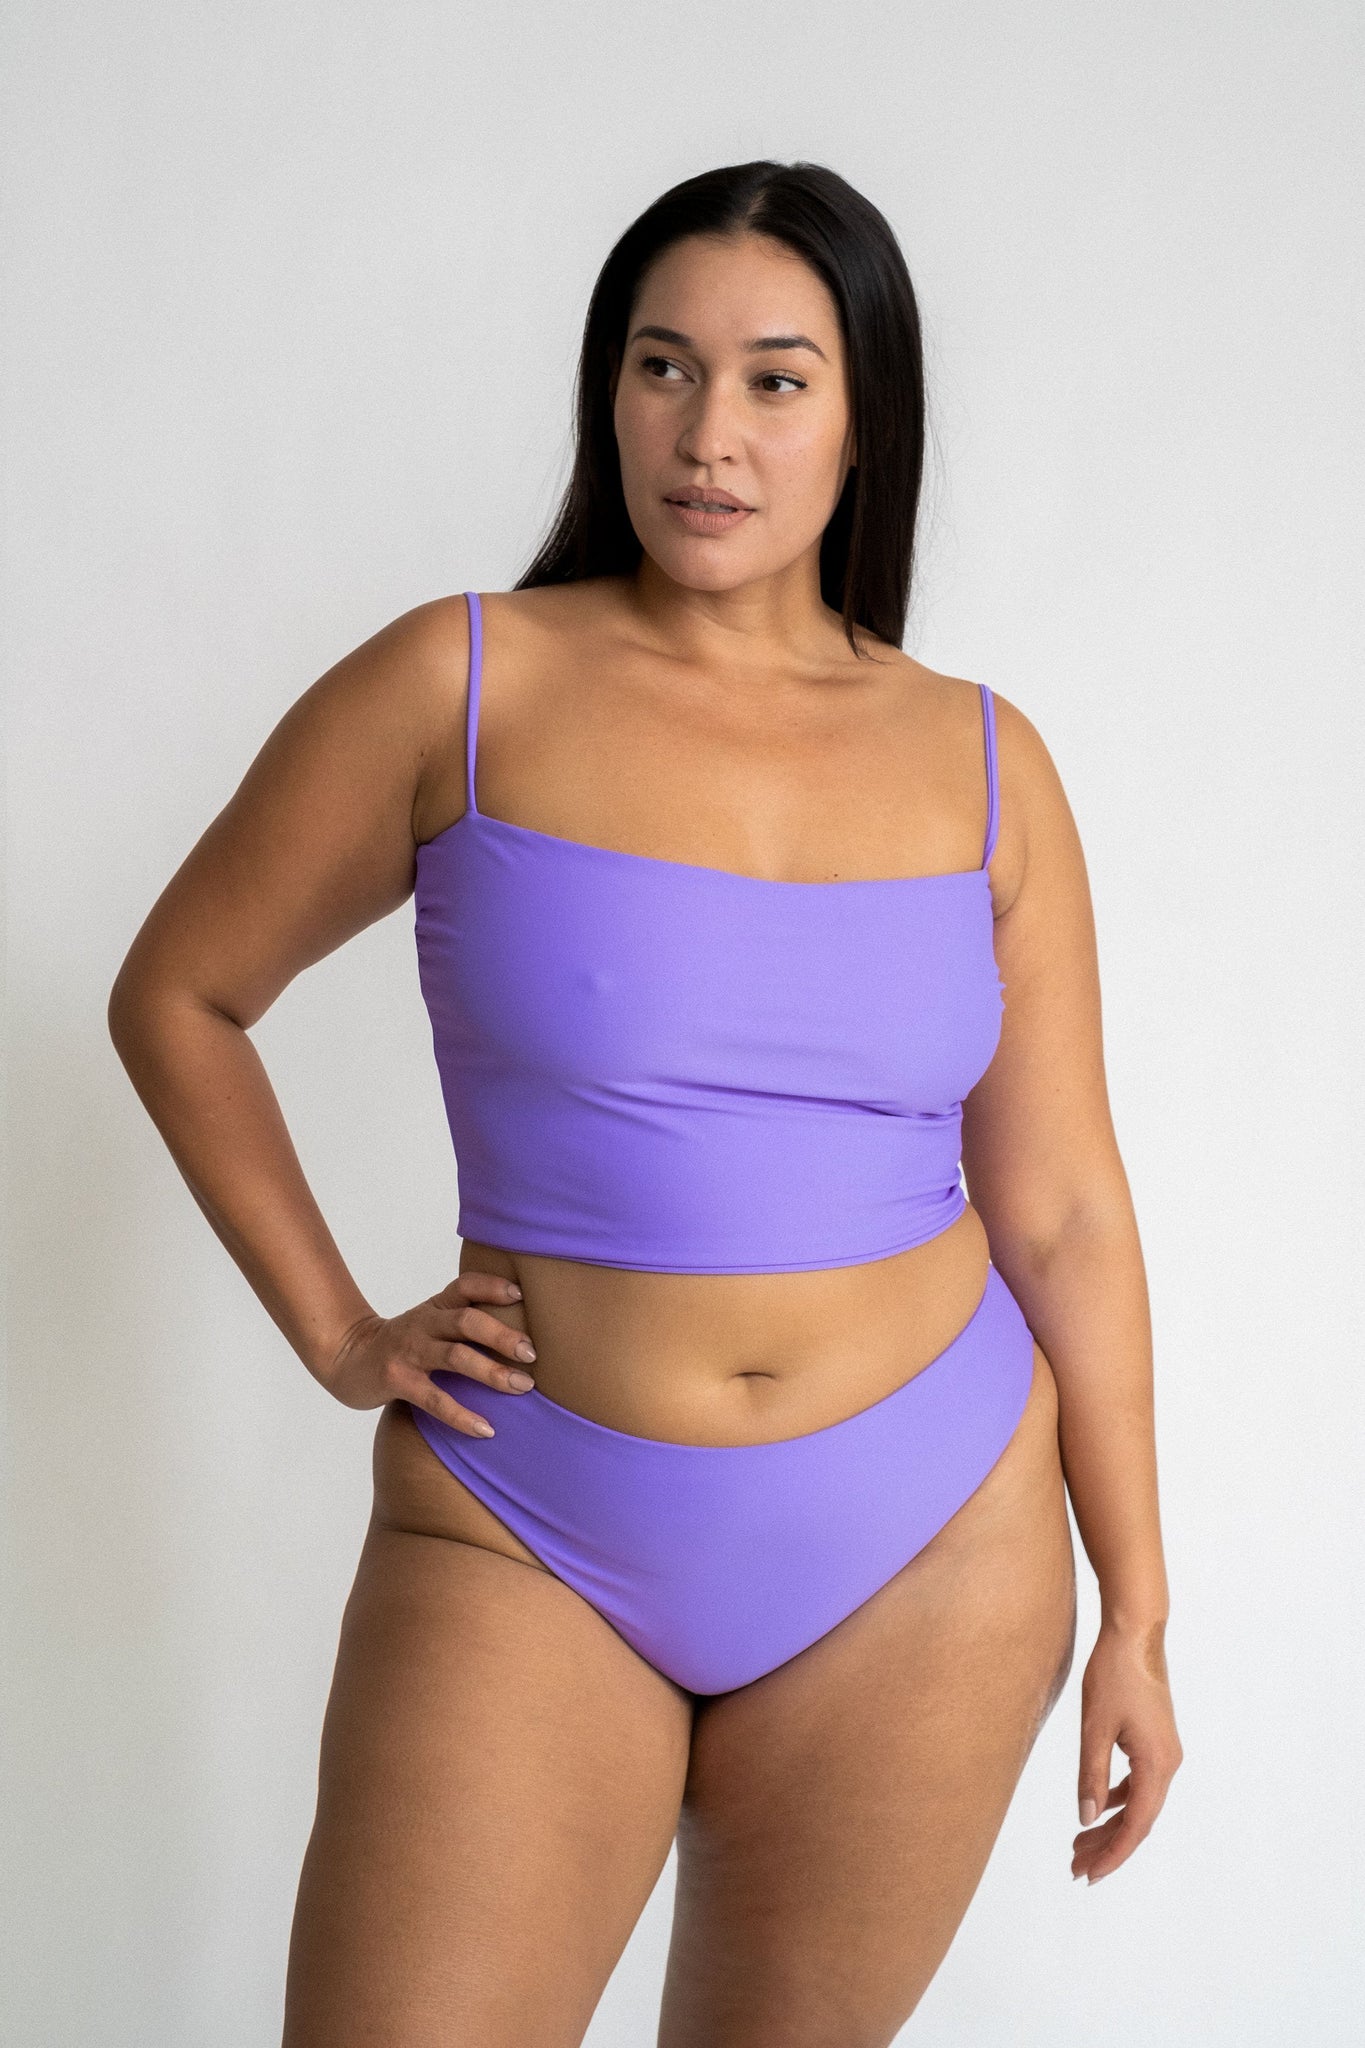 A woman standing with her hand on her hip looking to the side wearing bright lavender high cut bikini bottoms and a matching bright lavender tankini.